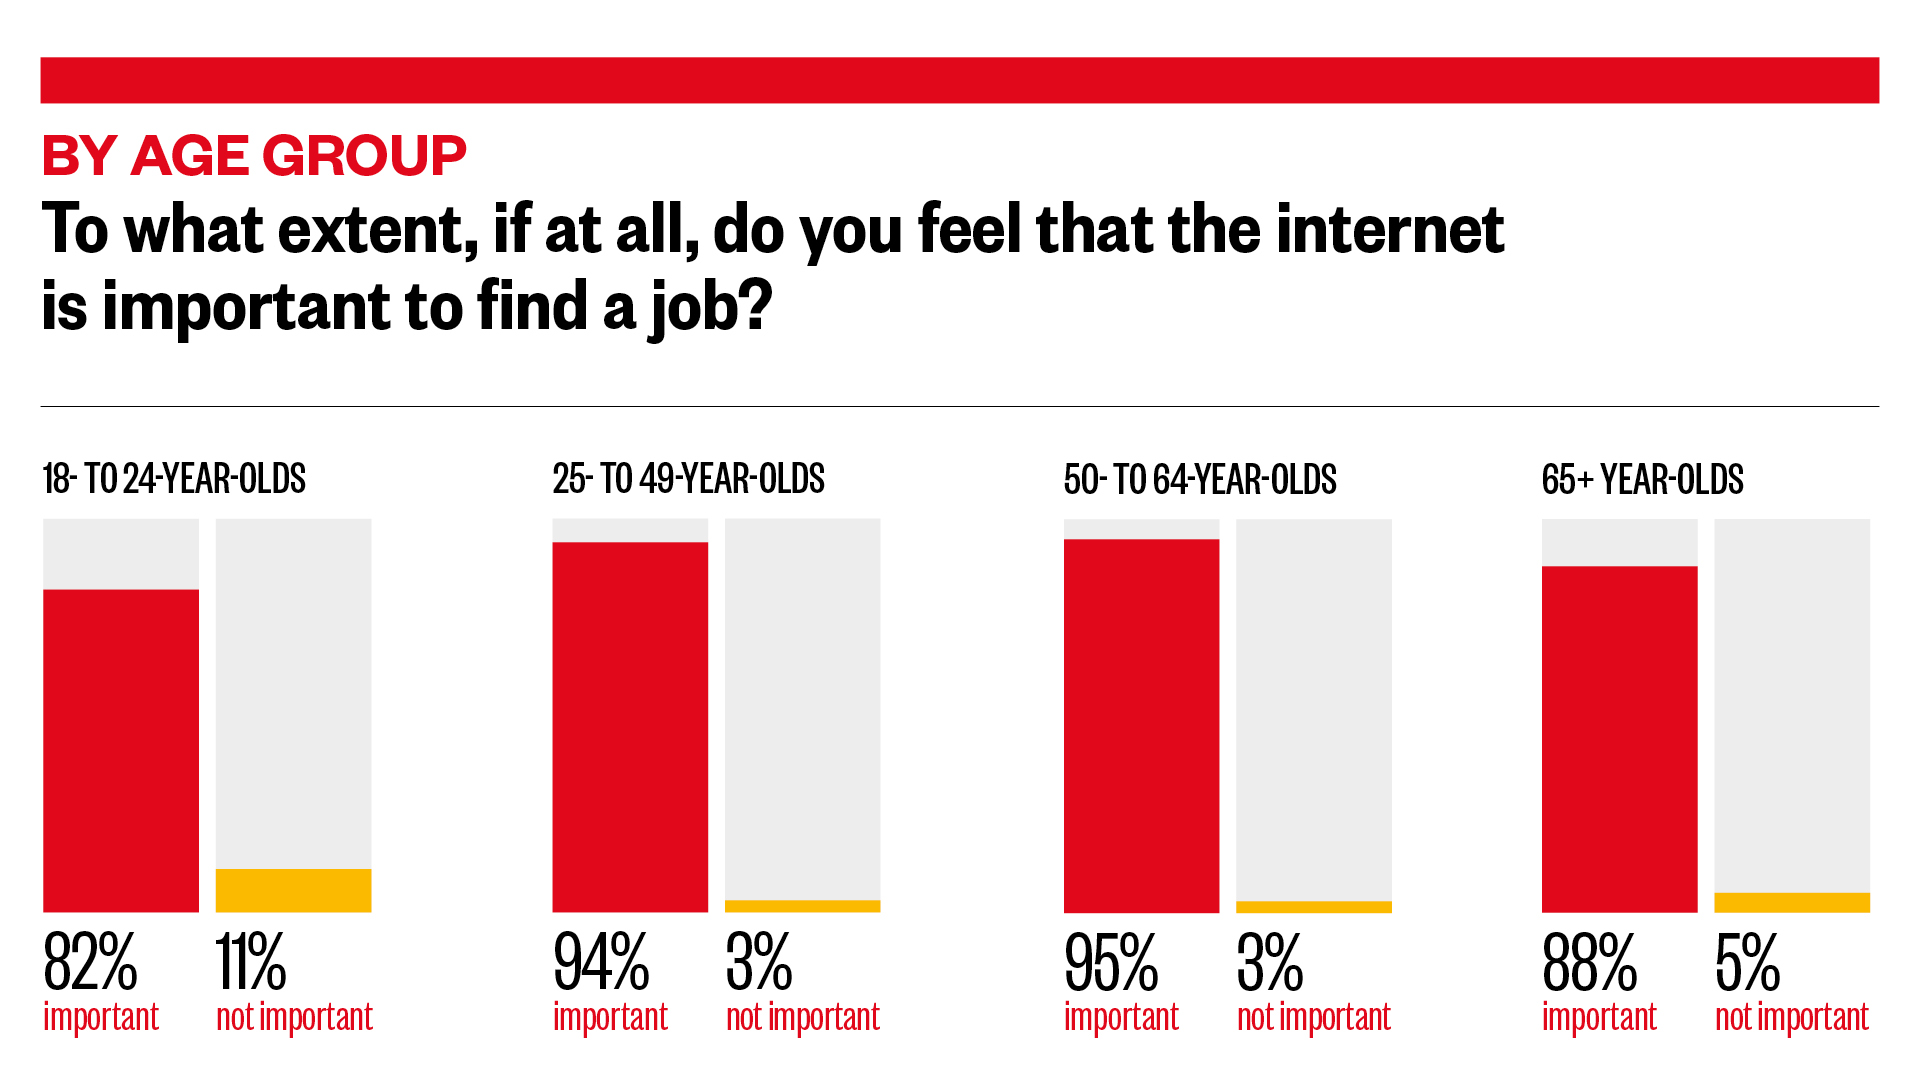 To what extent, if at all, do you feel that the internet is important to find a job?